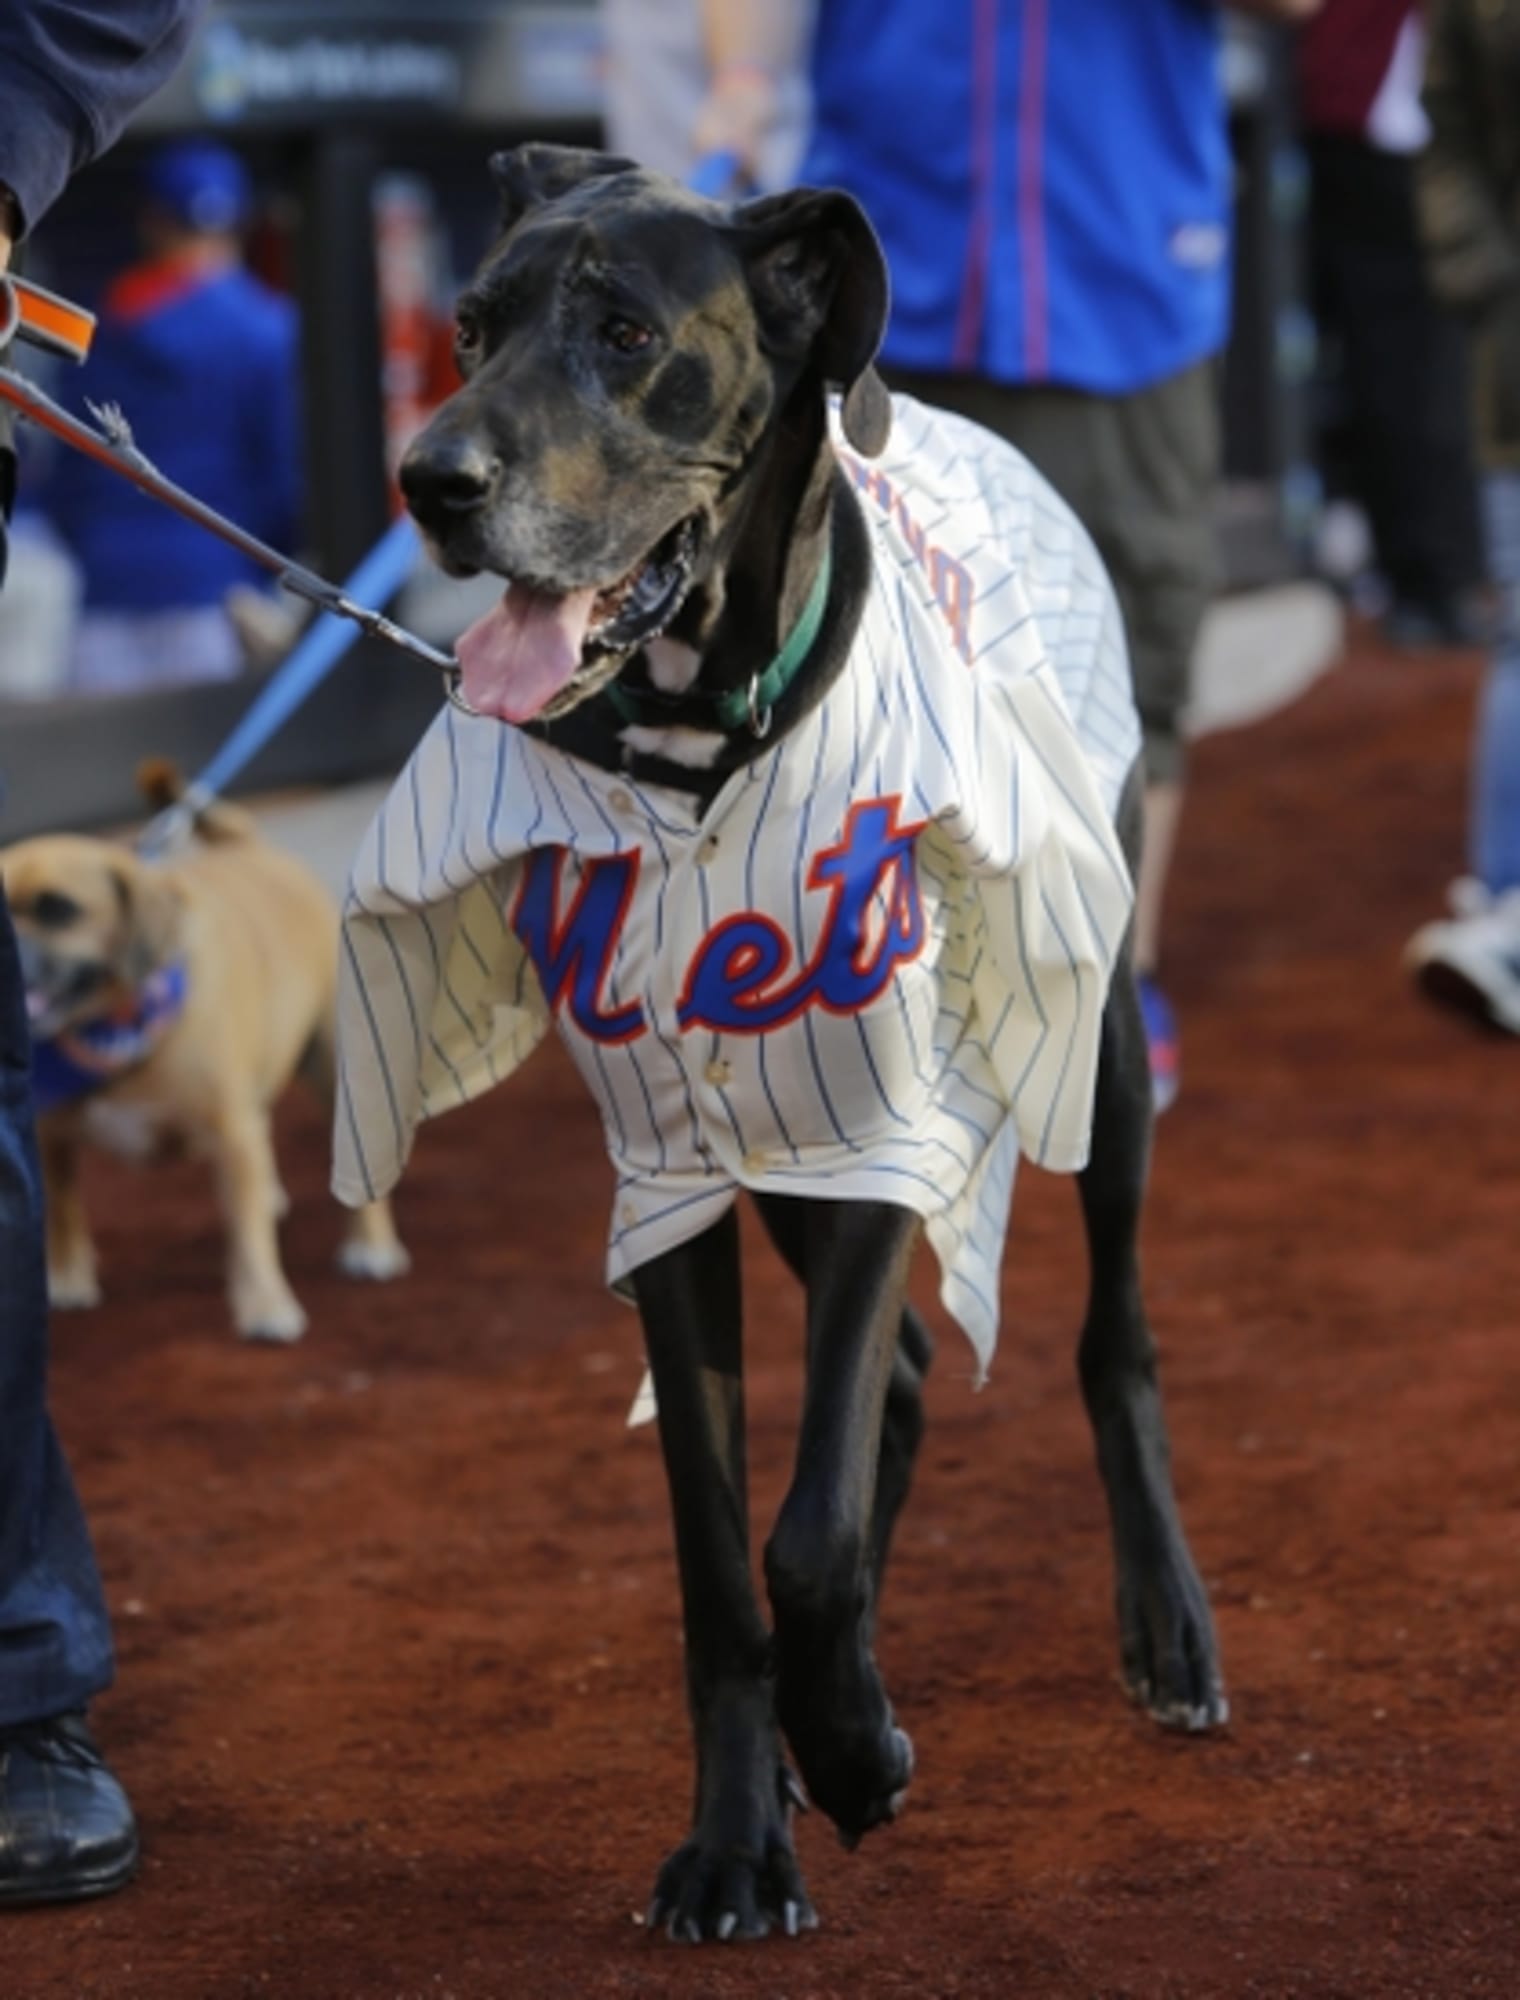 Mets in midst of the Dog Days of Spring?